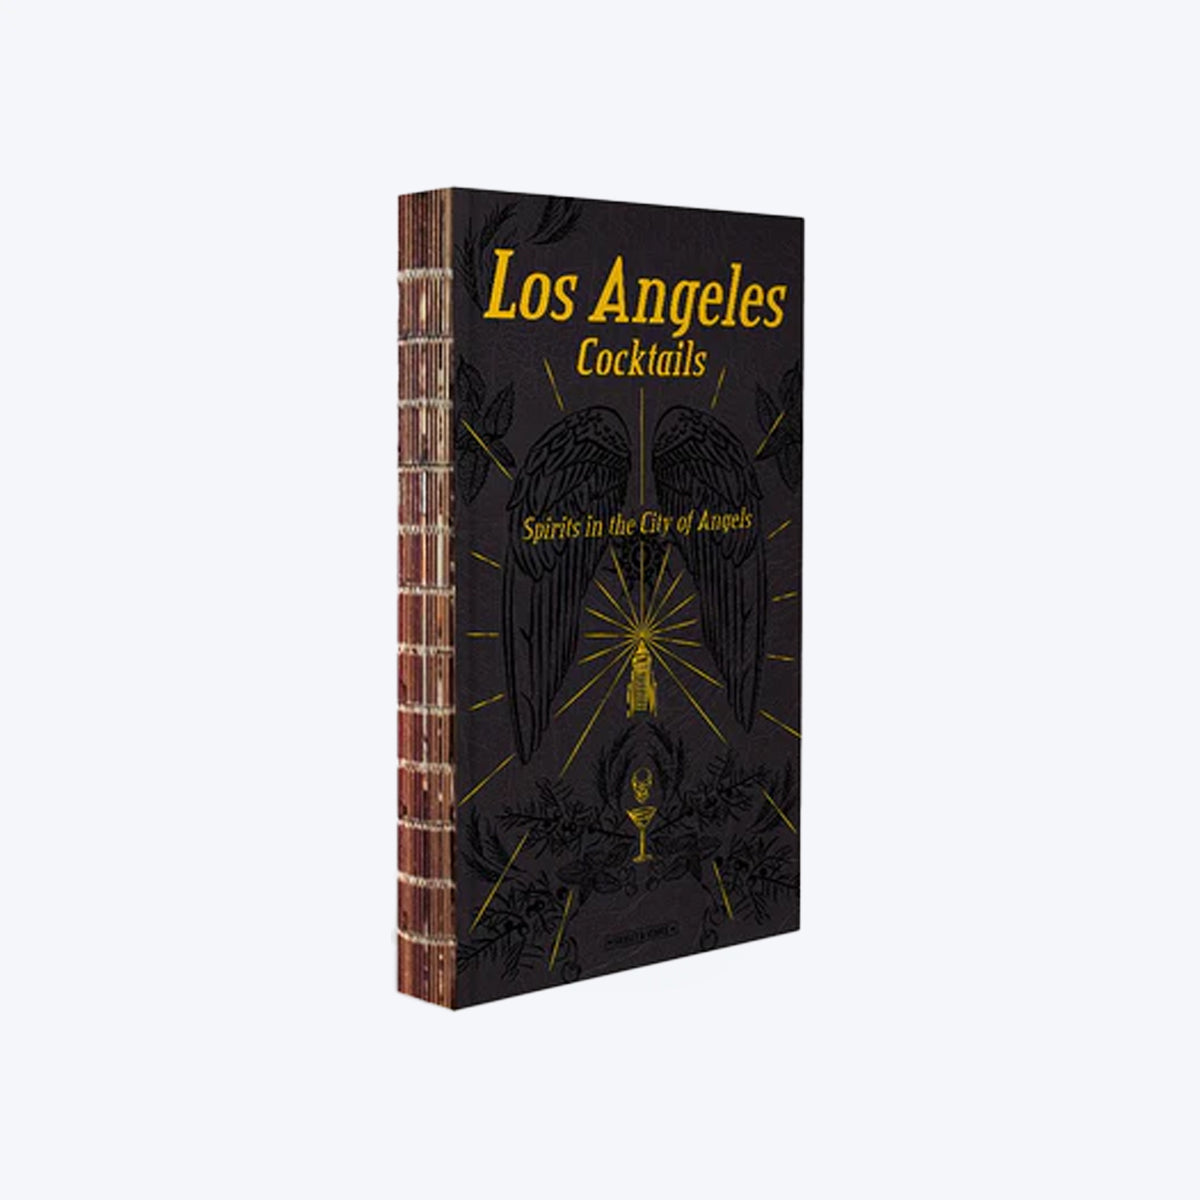 The Los Angeles Cocktails recipe book